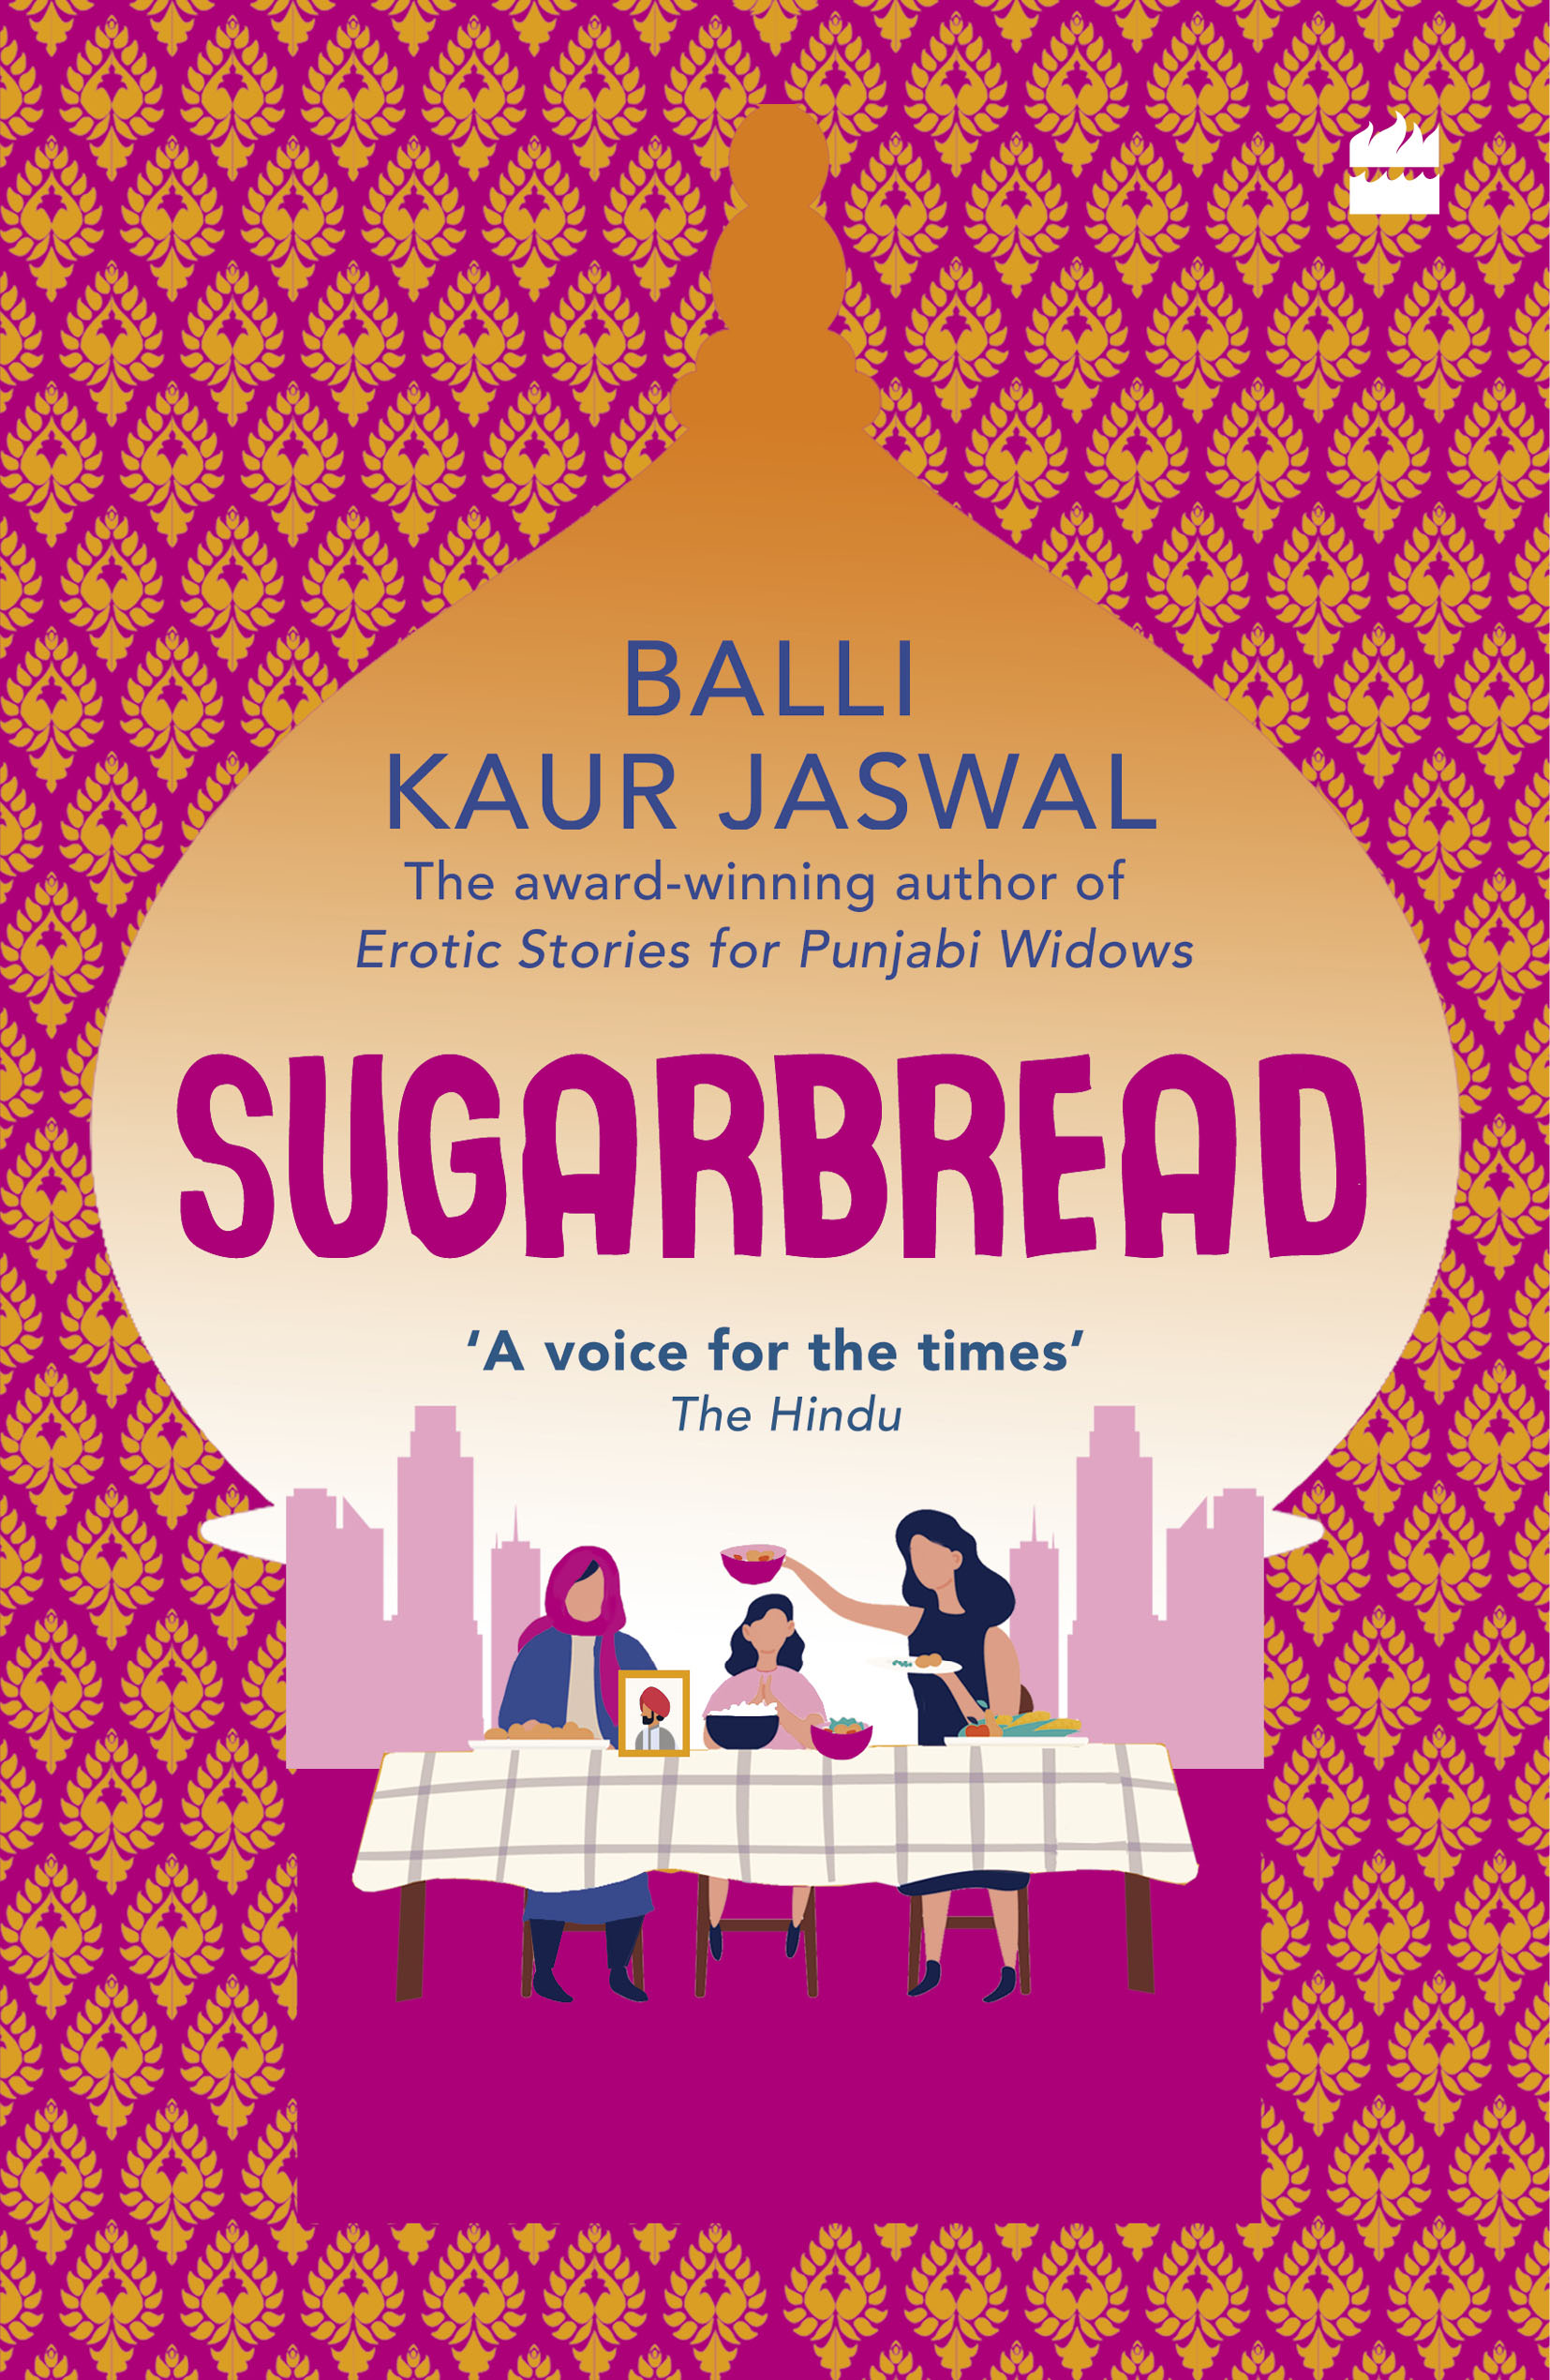 Book Excerpt | Sugarbread: A coming-of-age story about women, sexism, racism, food and memory